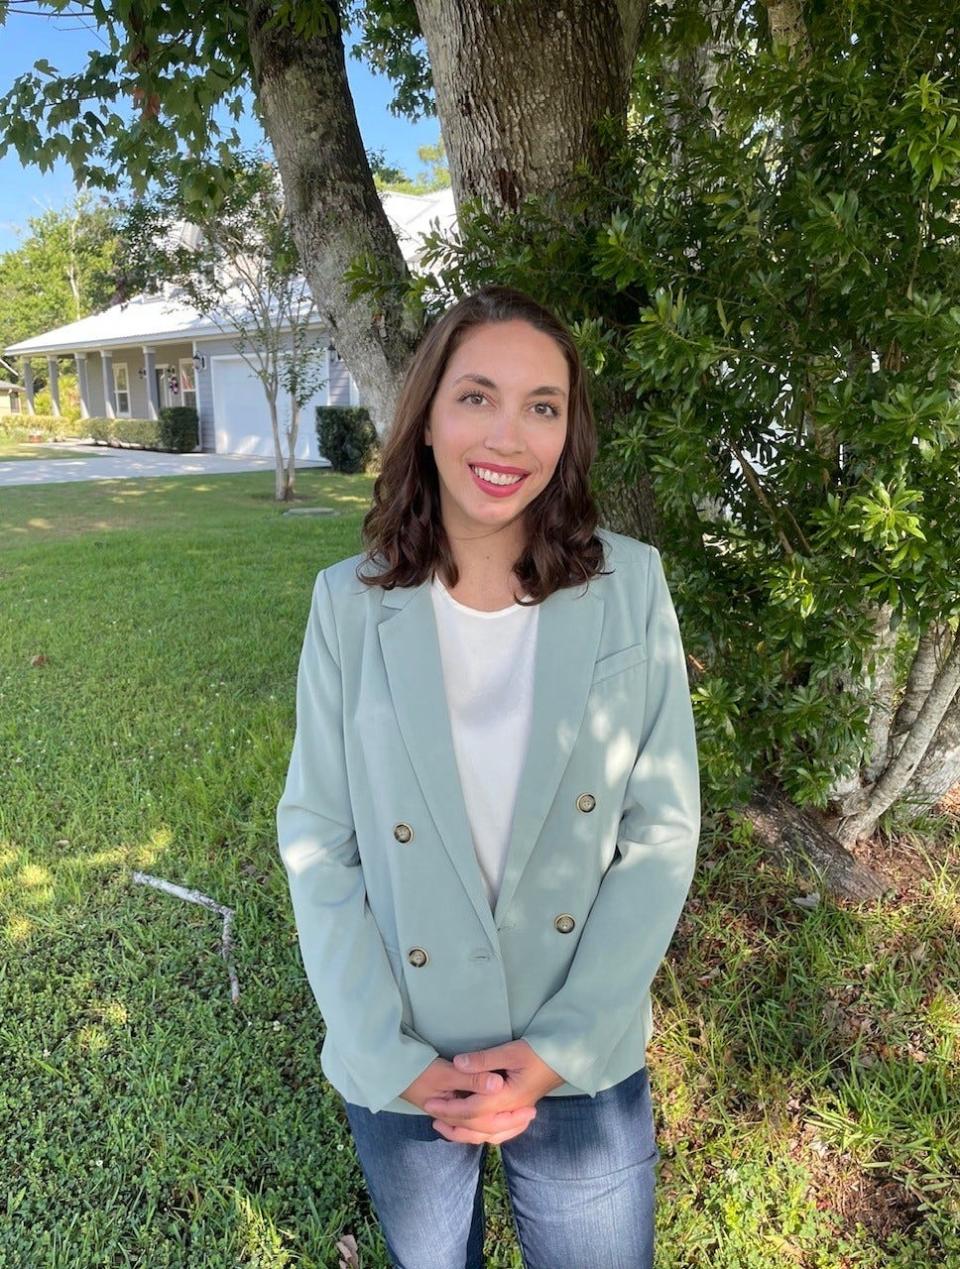 Christy Chong, 2022 candidate for Flagler County School Board District 4.